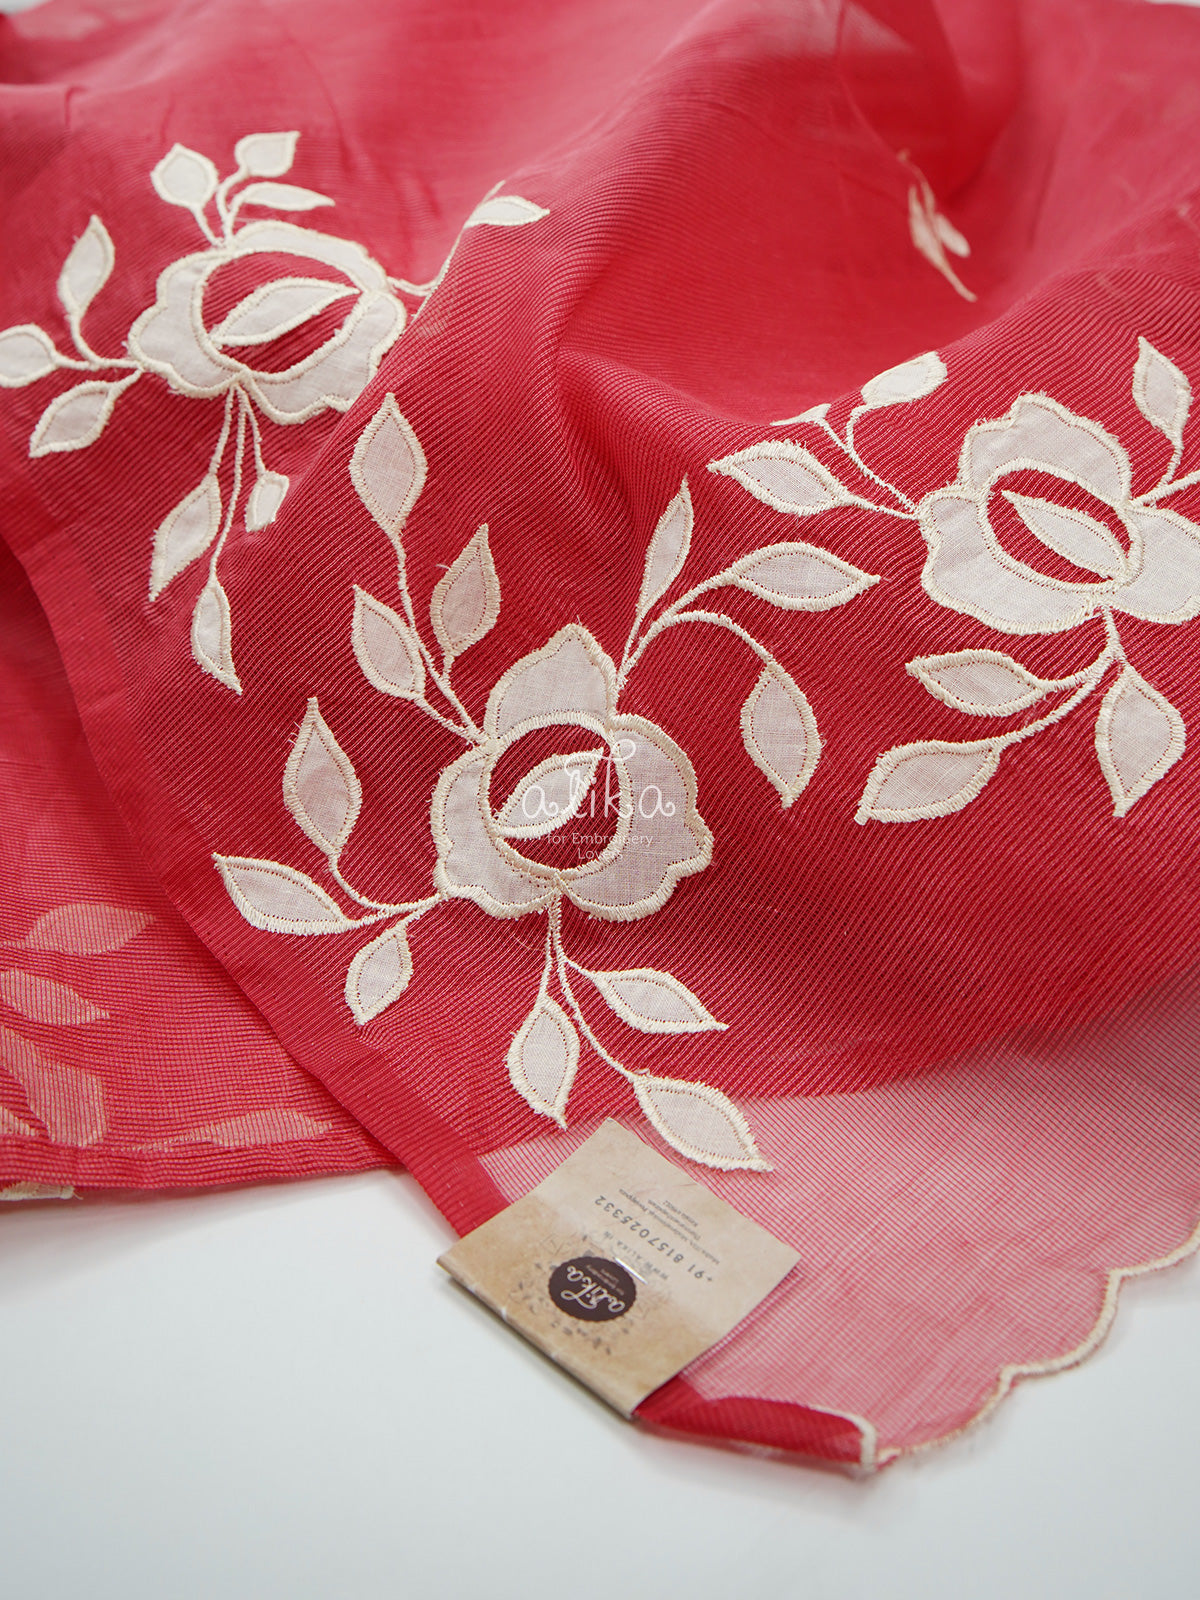 LIGHT PINKISH RED SHADE SILKY KOTA SAREE WITH APPLIQUE EMBROIDERY